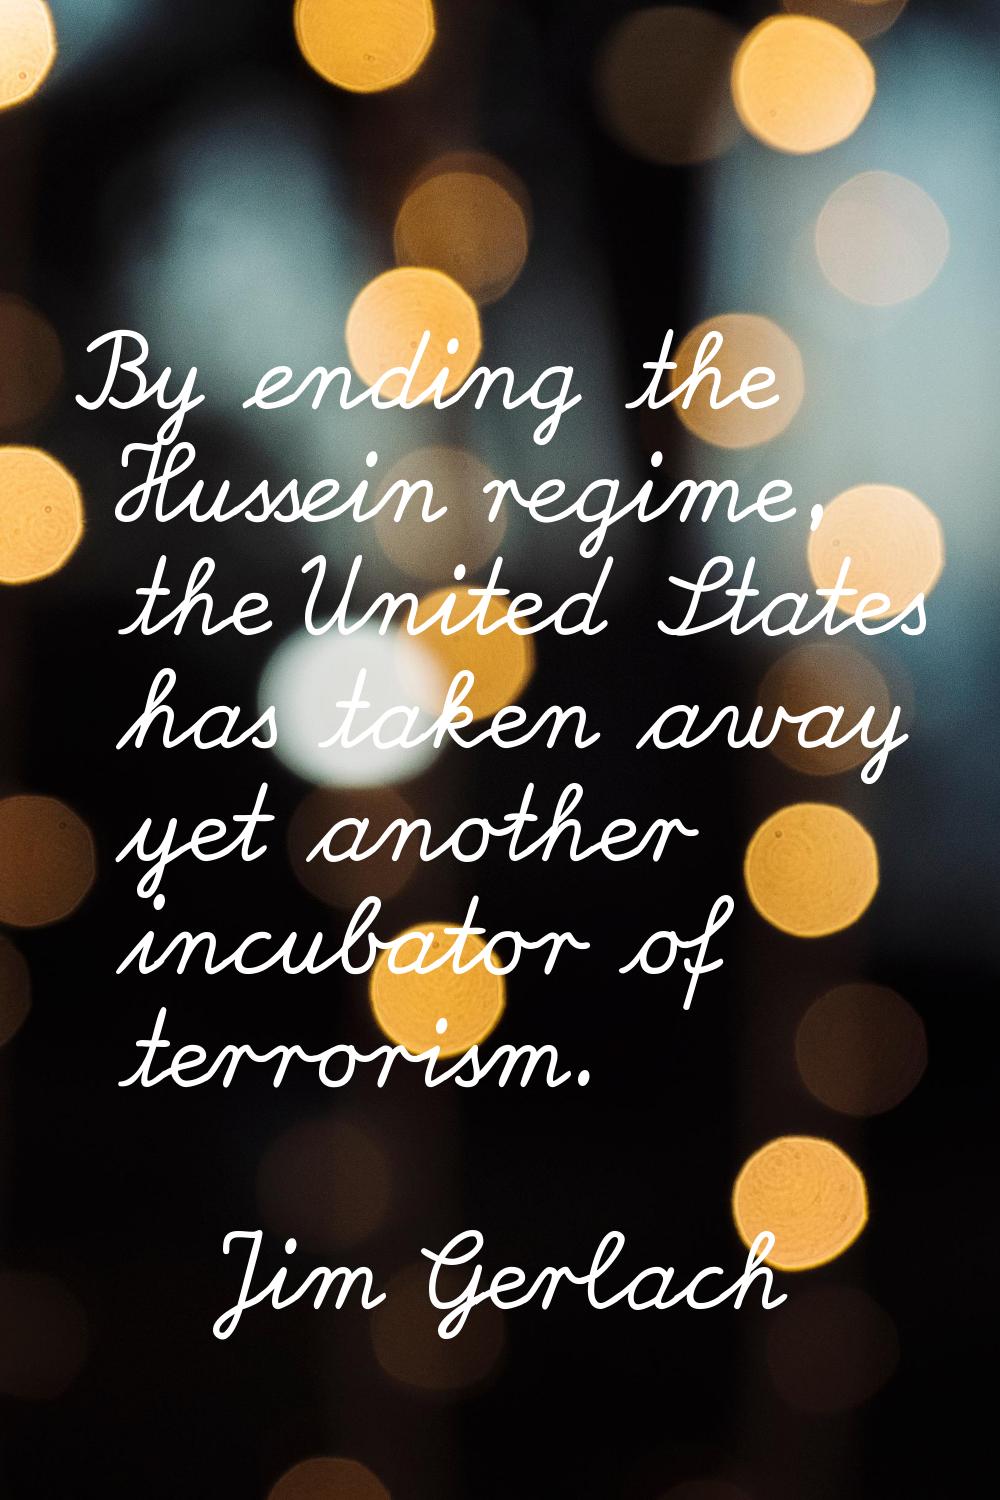 By ending the Hussein regime, the United States has taken away yet another incubator of terrorism.